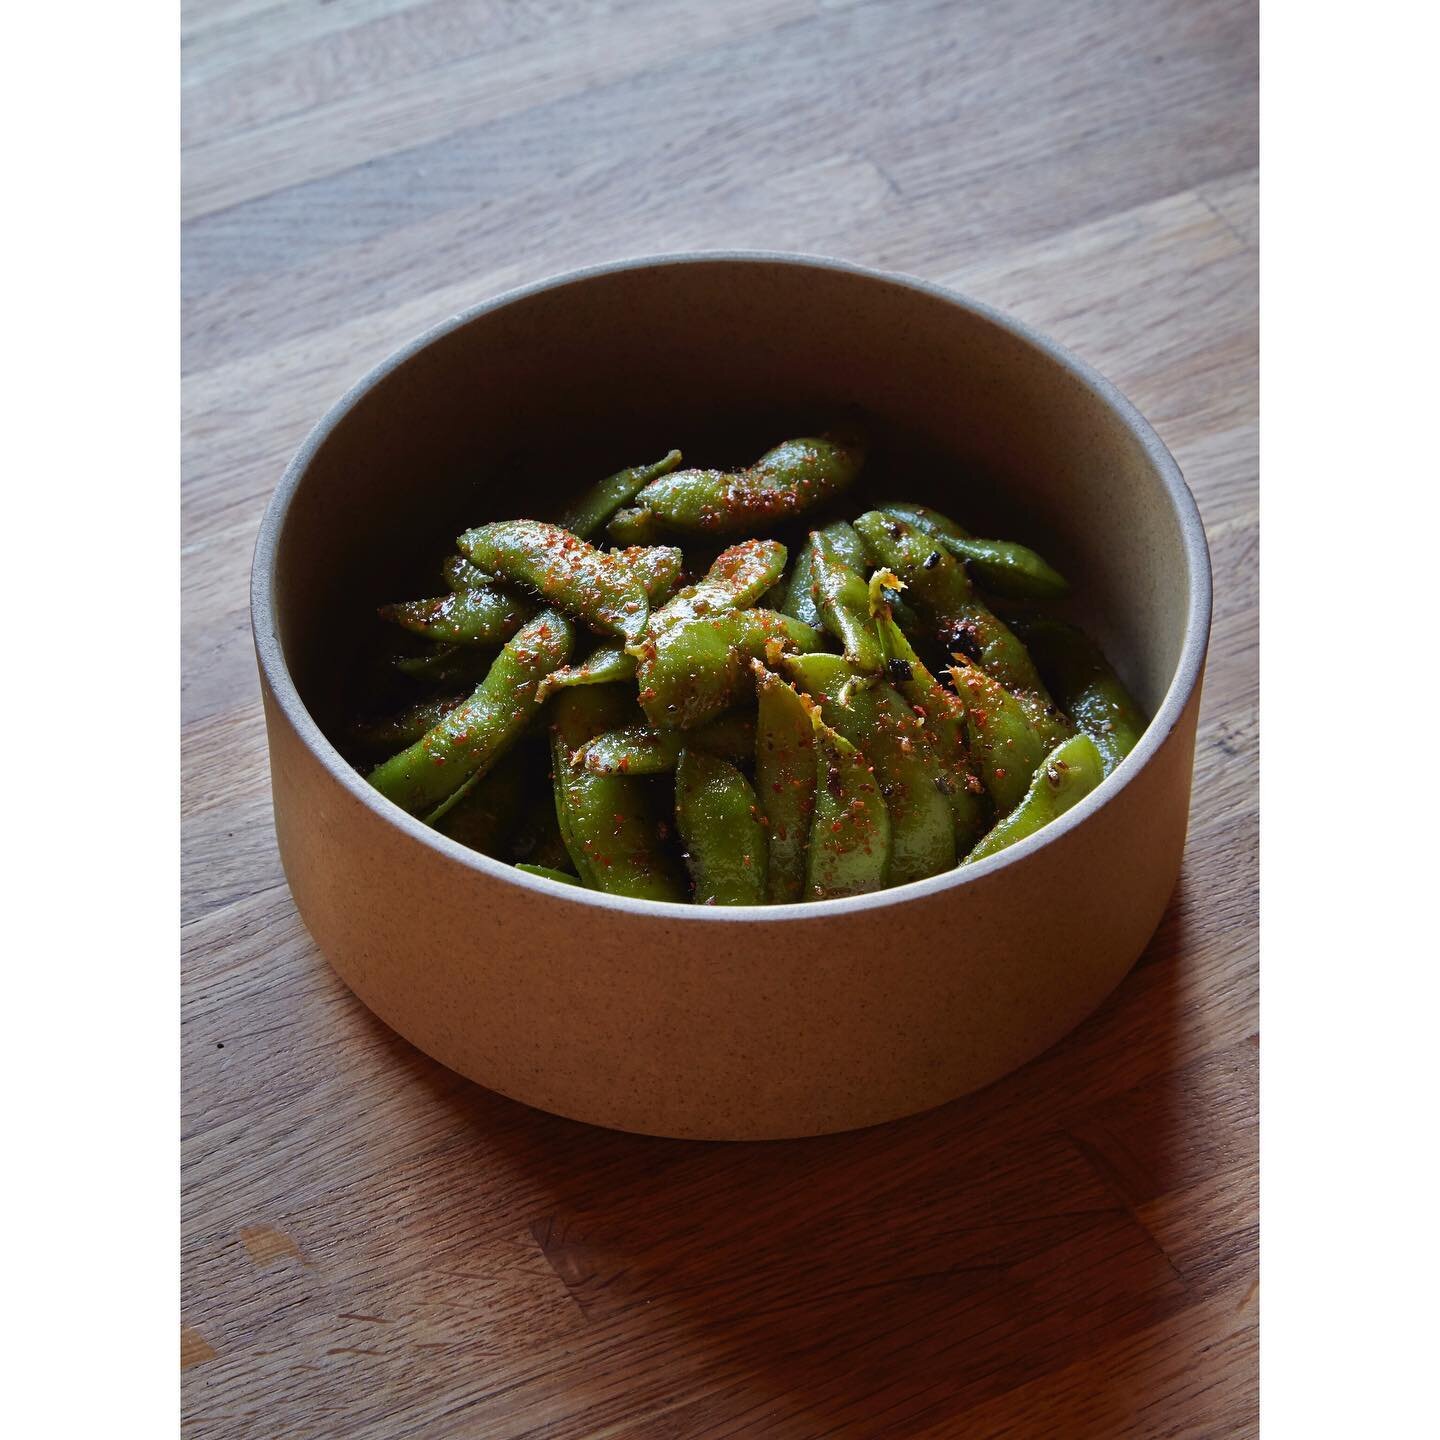 DASHI EDAMAME
New Menu! Our take on everyone&rsquo;s favorite starter. Perfectly paired with @rockawaybrewco ESB.

#edamame #dashi #humpday

Now we&rsquo;re serving a full menu for our outdoor dining. Please call us at (718) 361-7973 for reservations